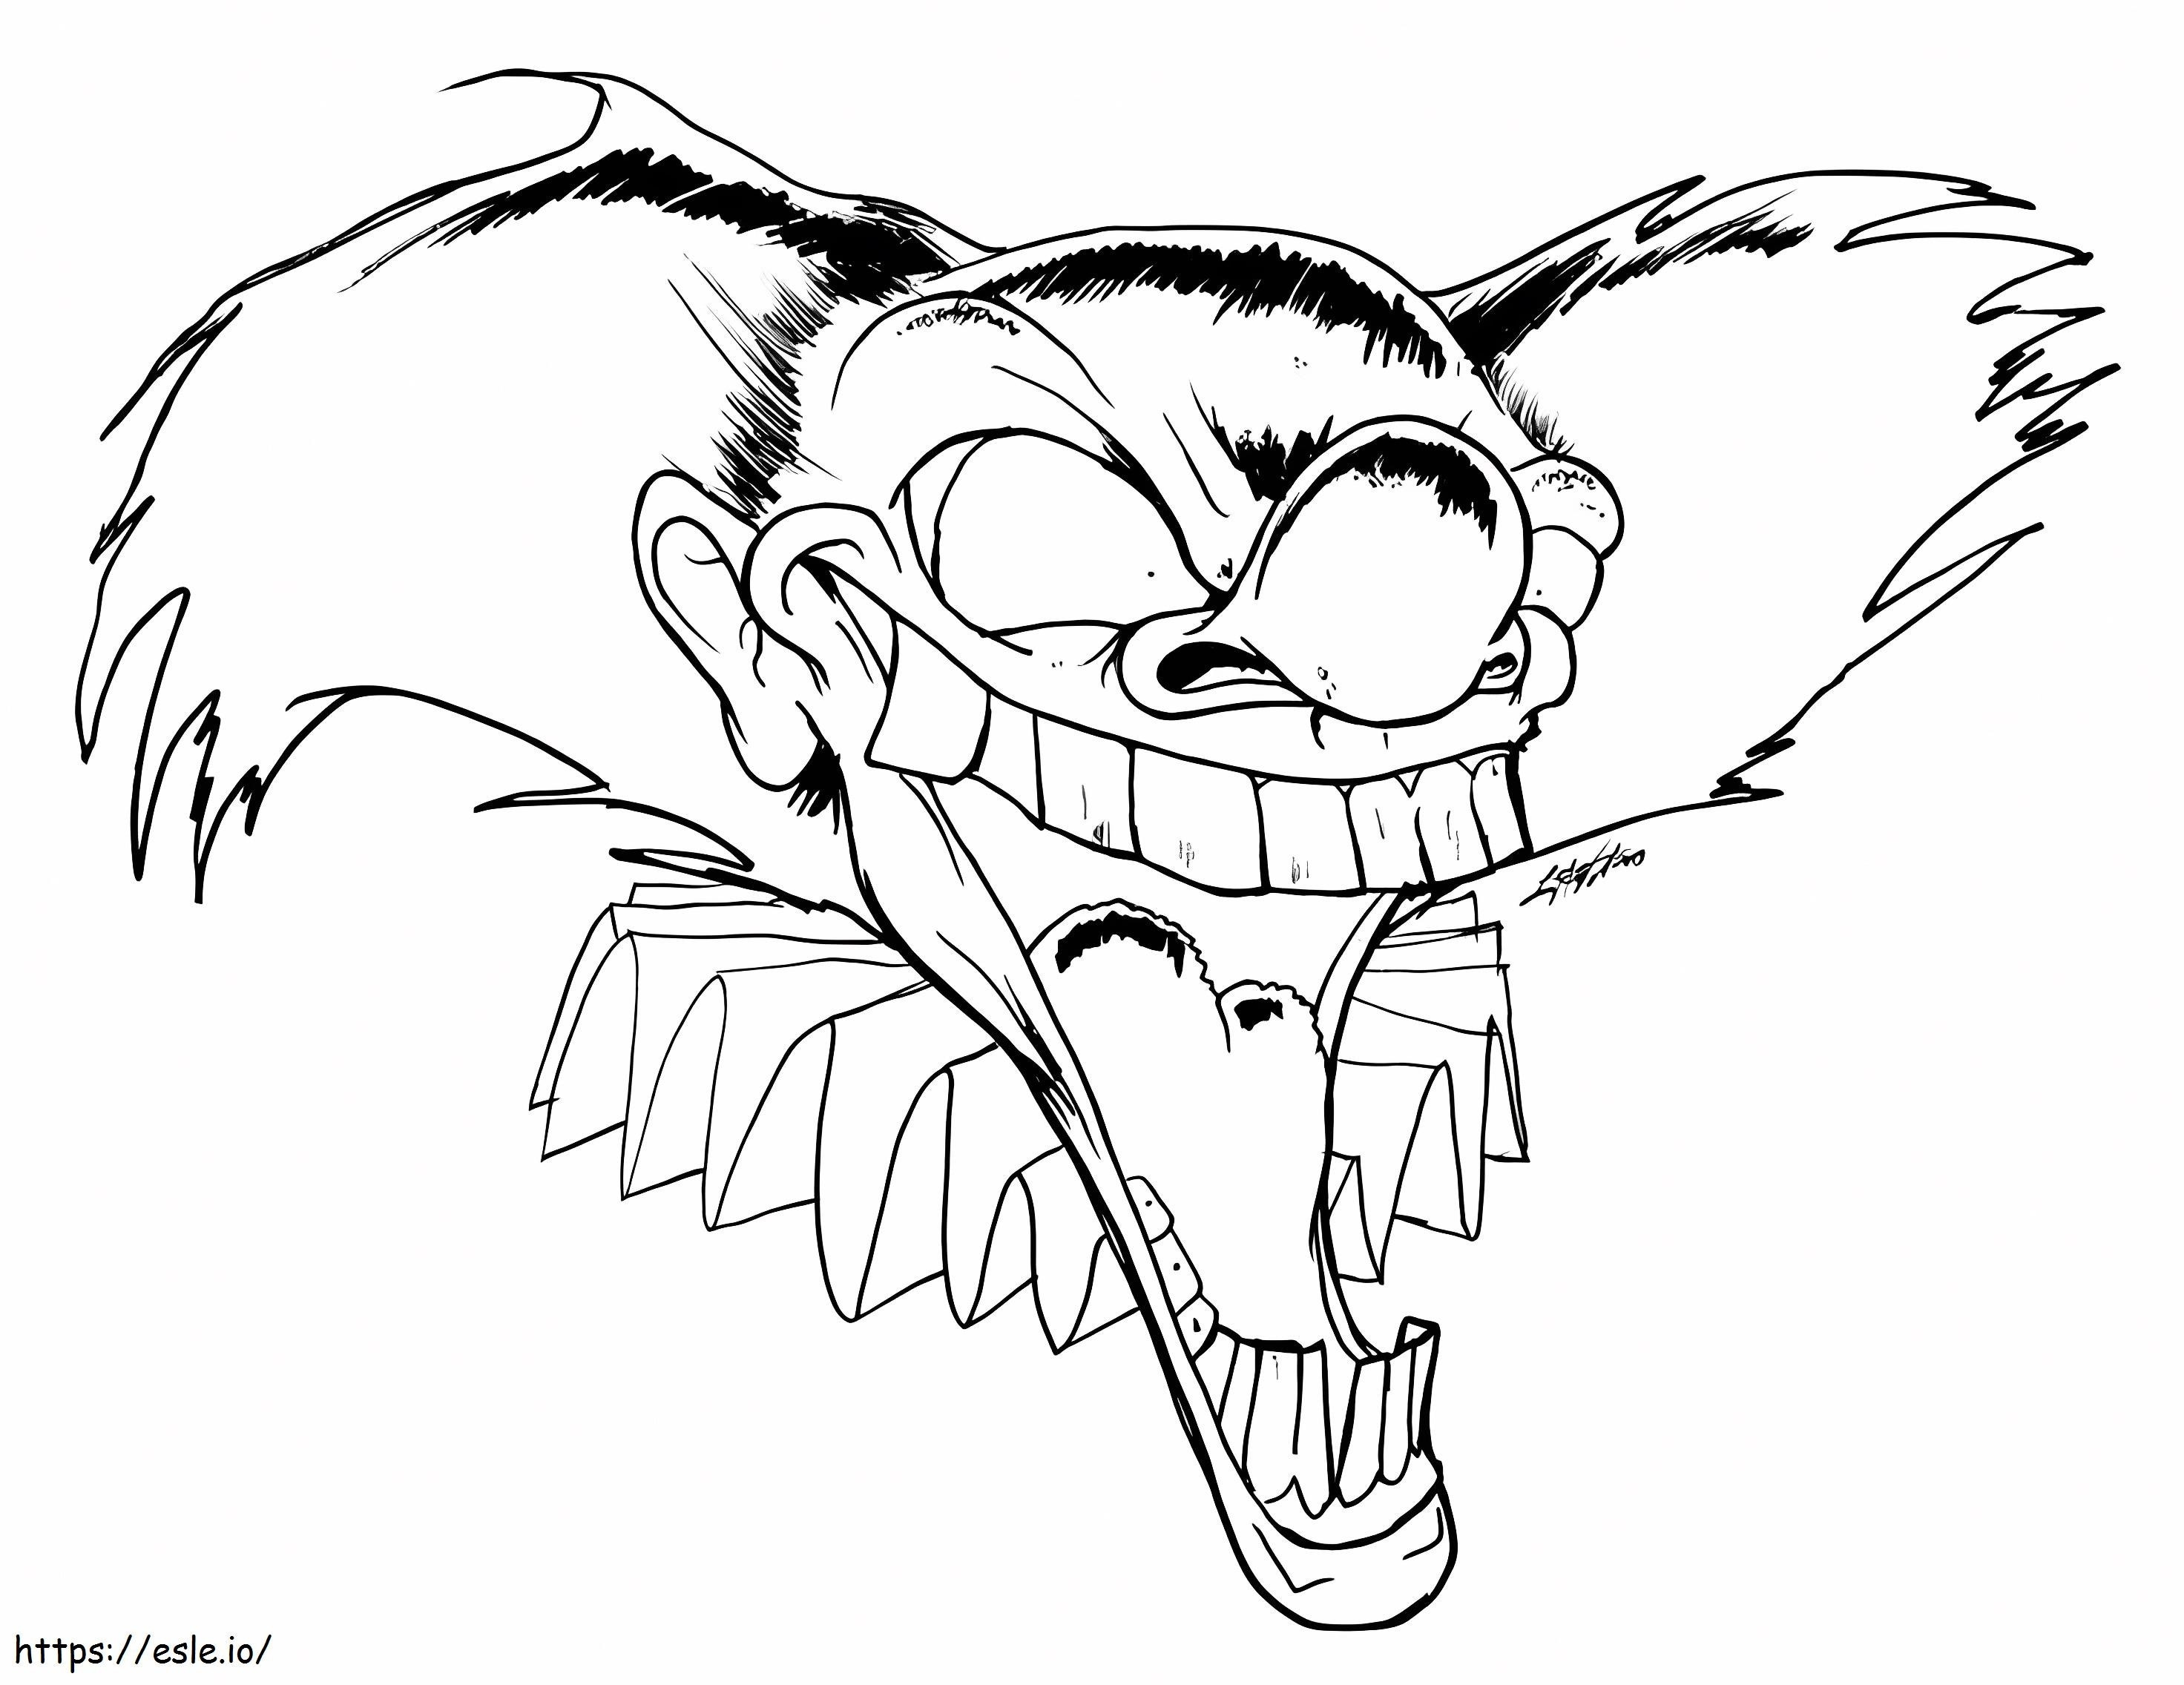 Scary Clown coloring page